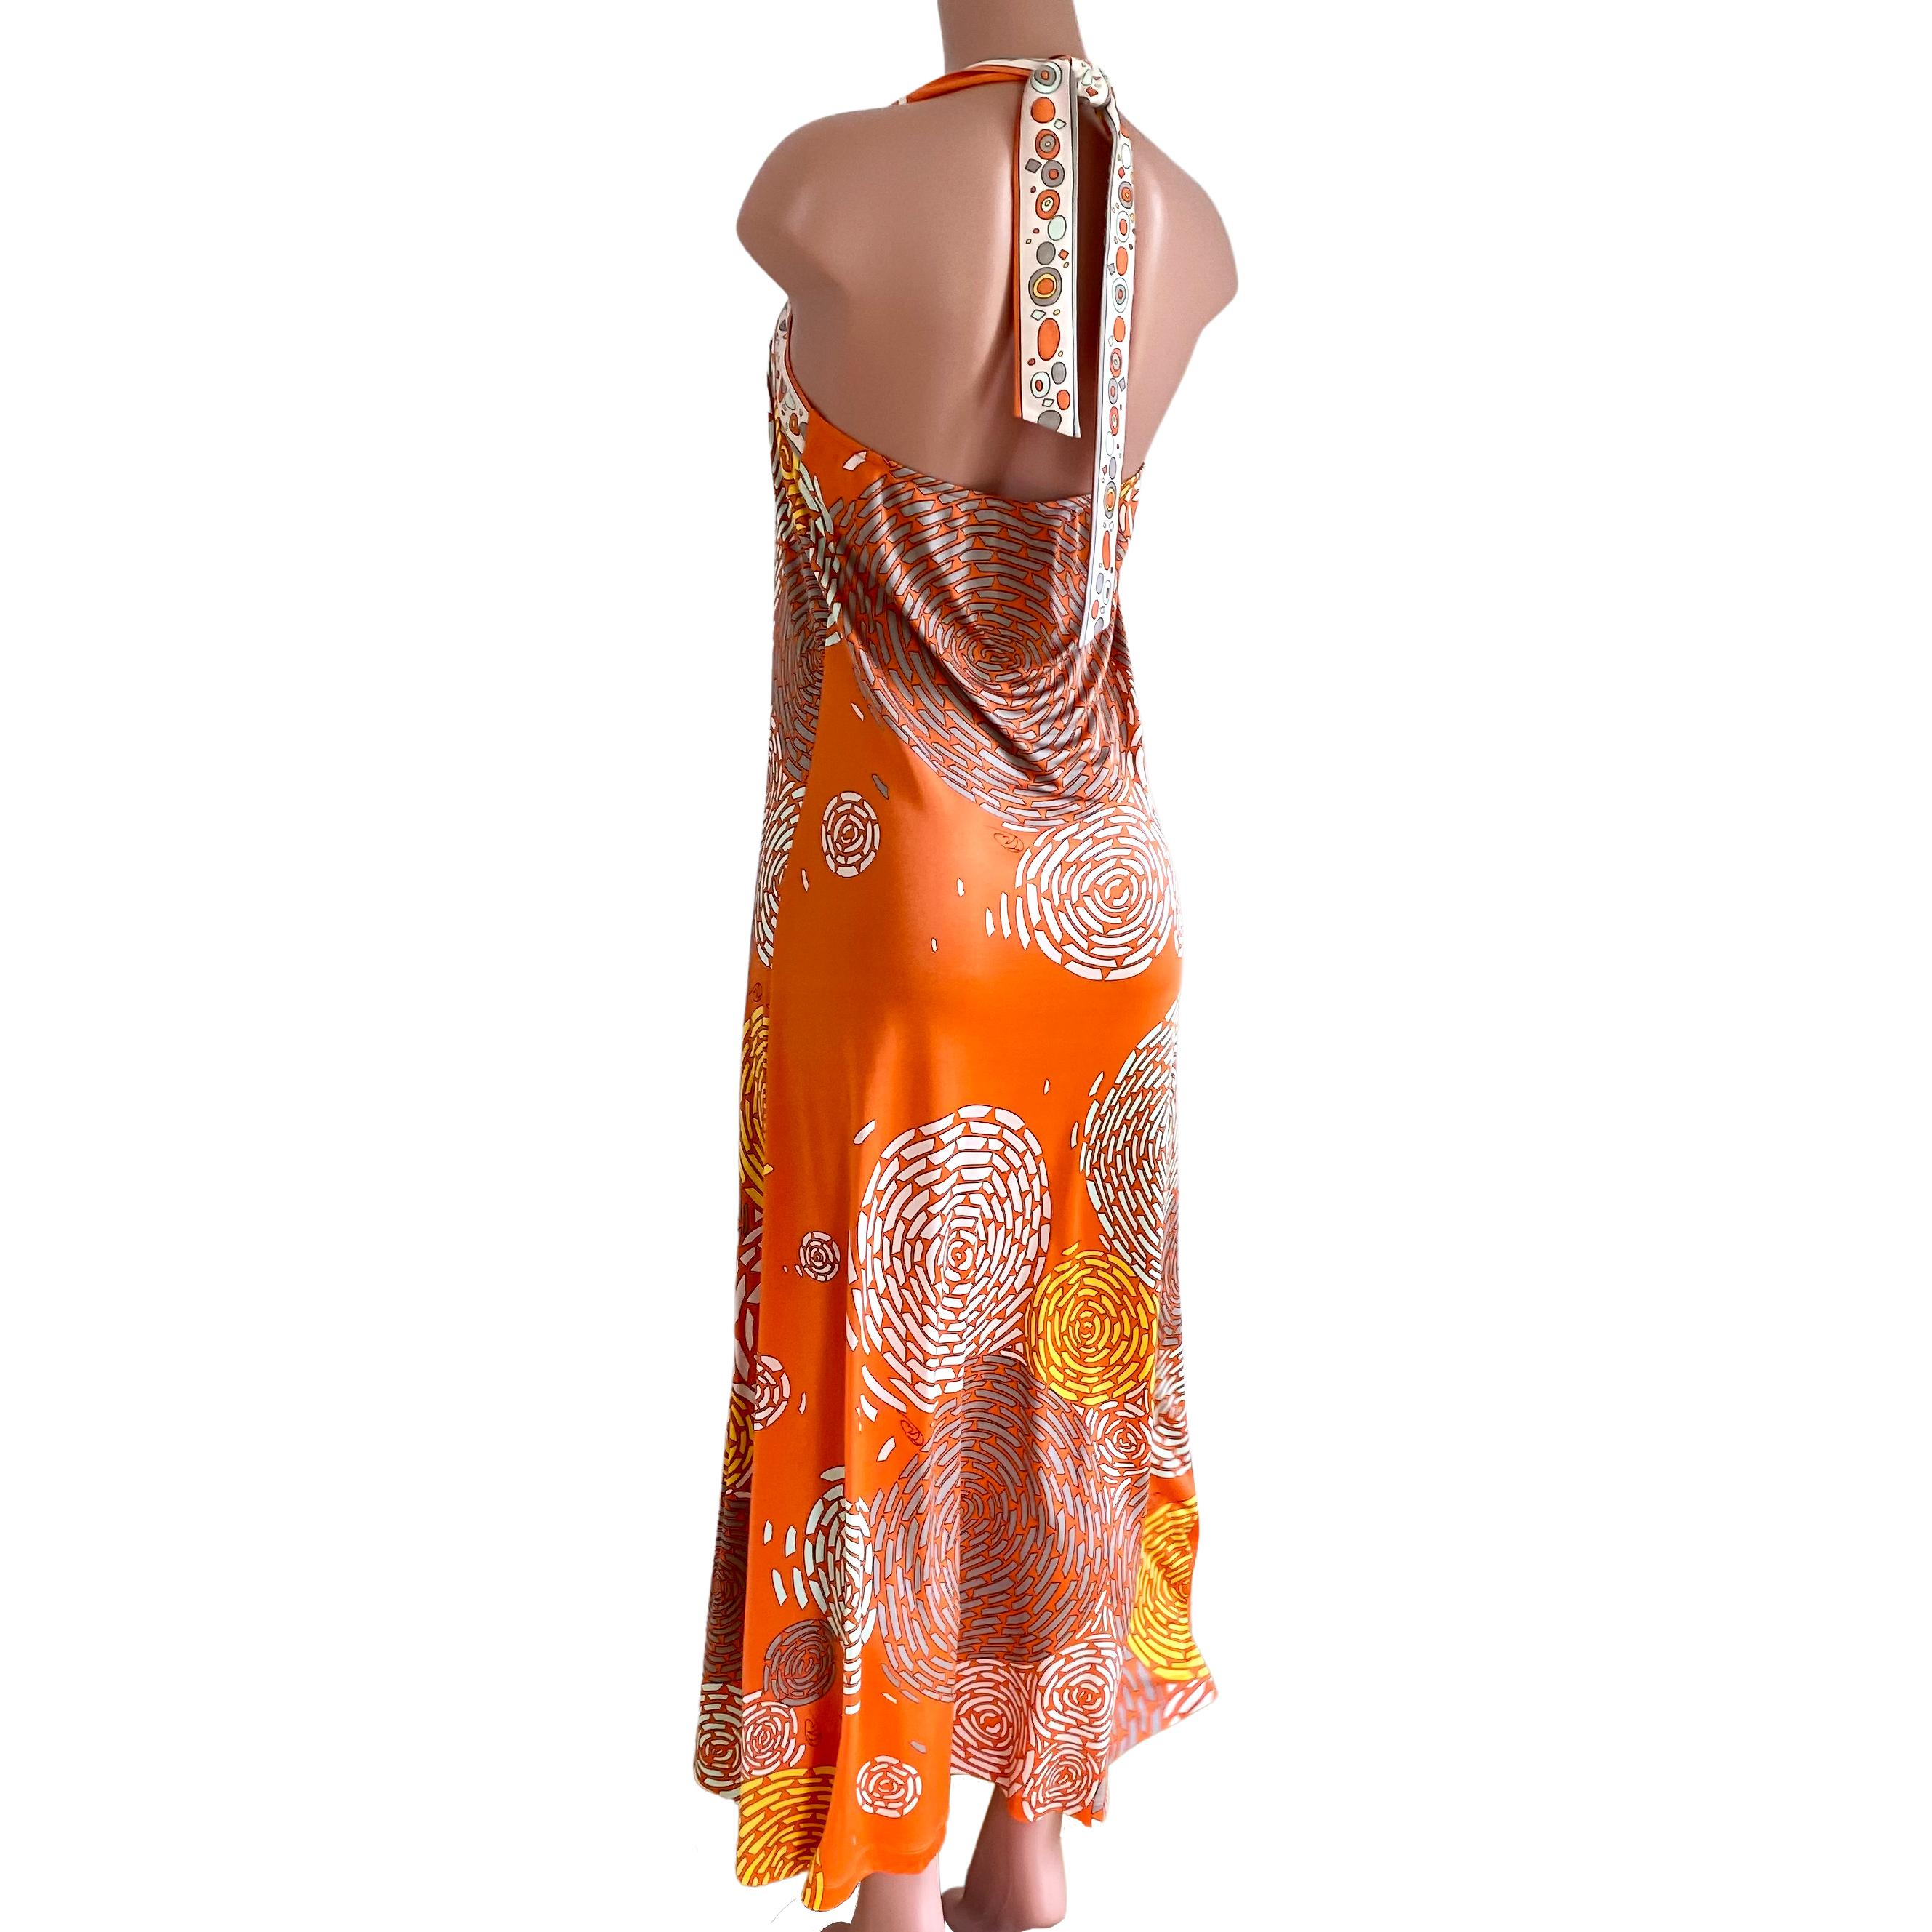 Stylized chrysanthemum mixed-print silk jersey boho maxi dress.
Wear it with a belt or as is. Dress it up or down.
Self-tie at the back neck for a perfect fit. Generous skirt made with yards of luxurious pure silk.
To learn more about Flora the